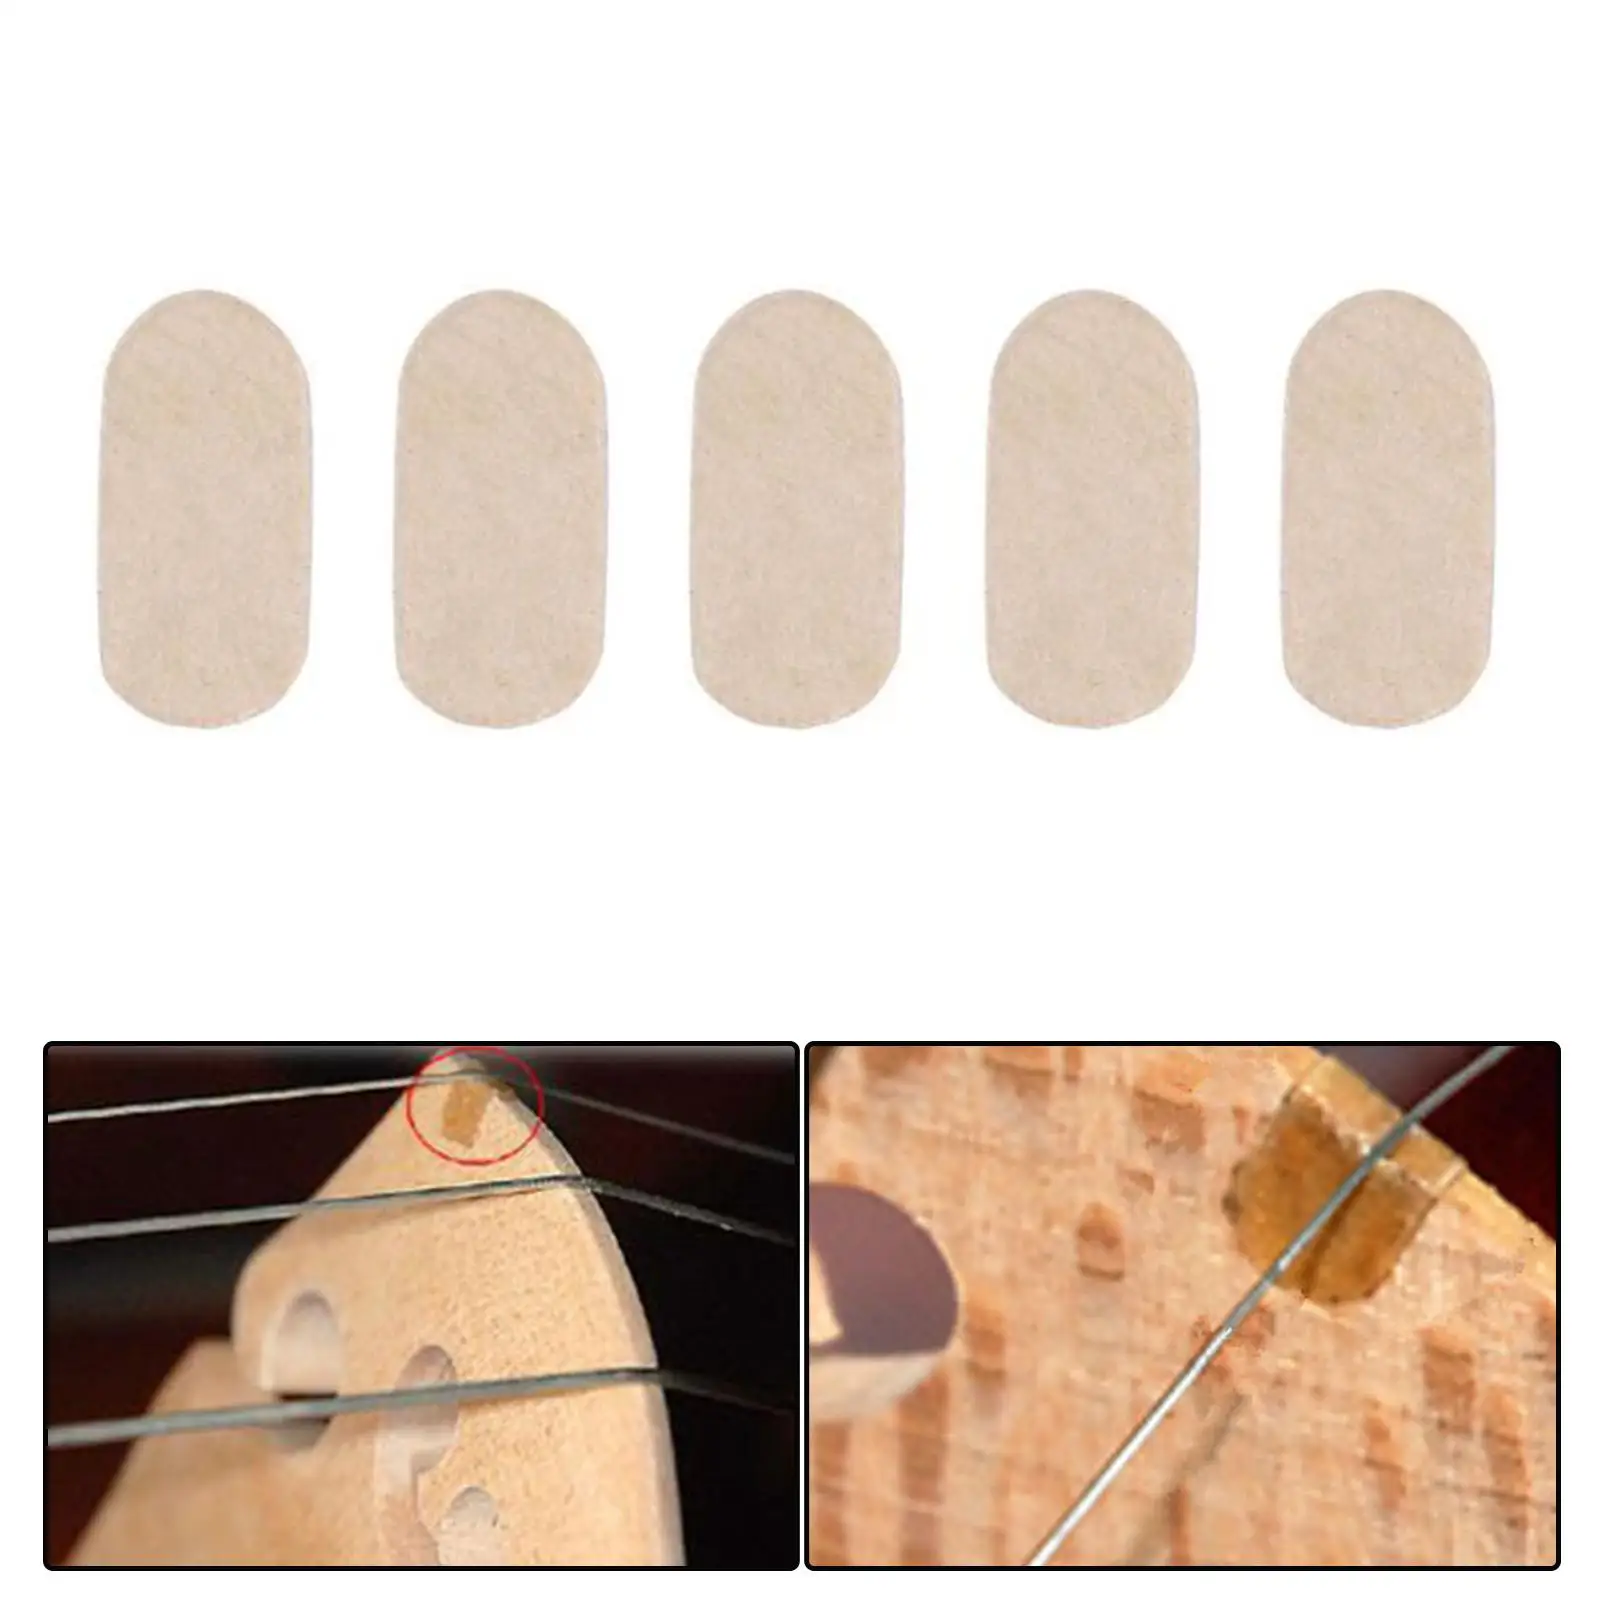 5 Pieces Bridge Parchment Pads Strings Accessories Musical Instruments String Protector for Violin Viola Cello